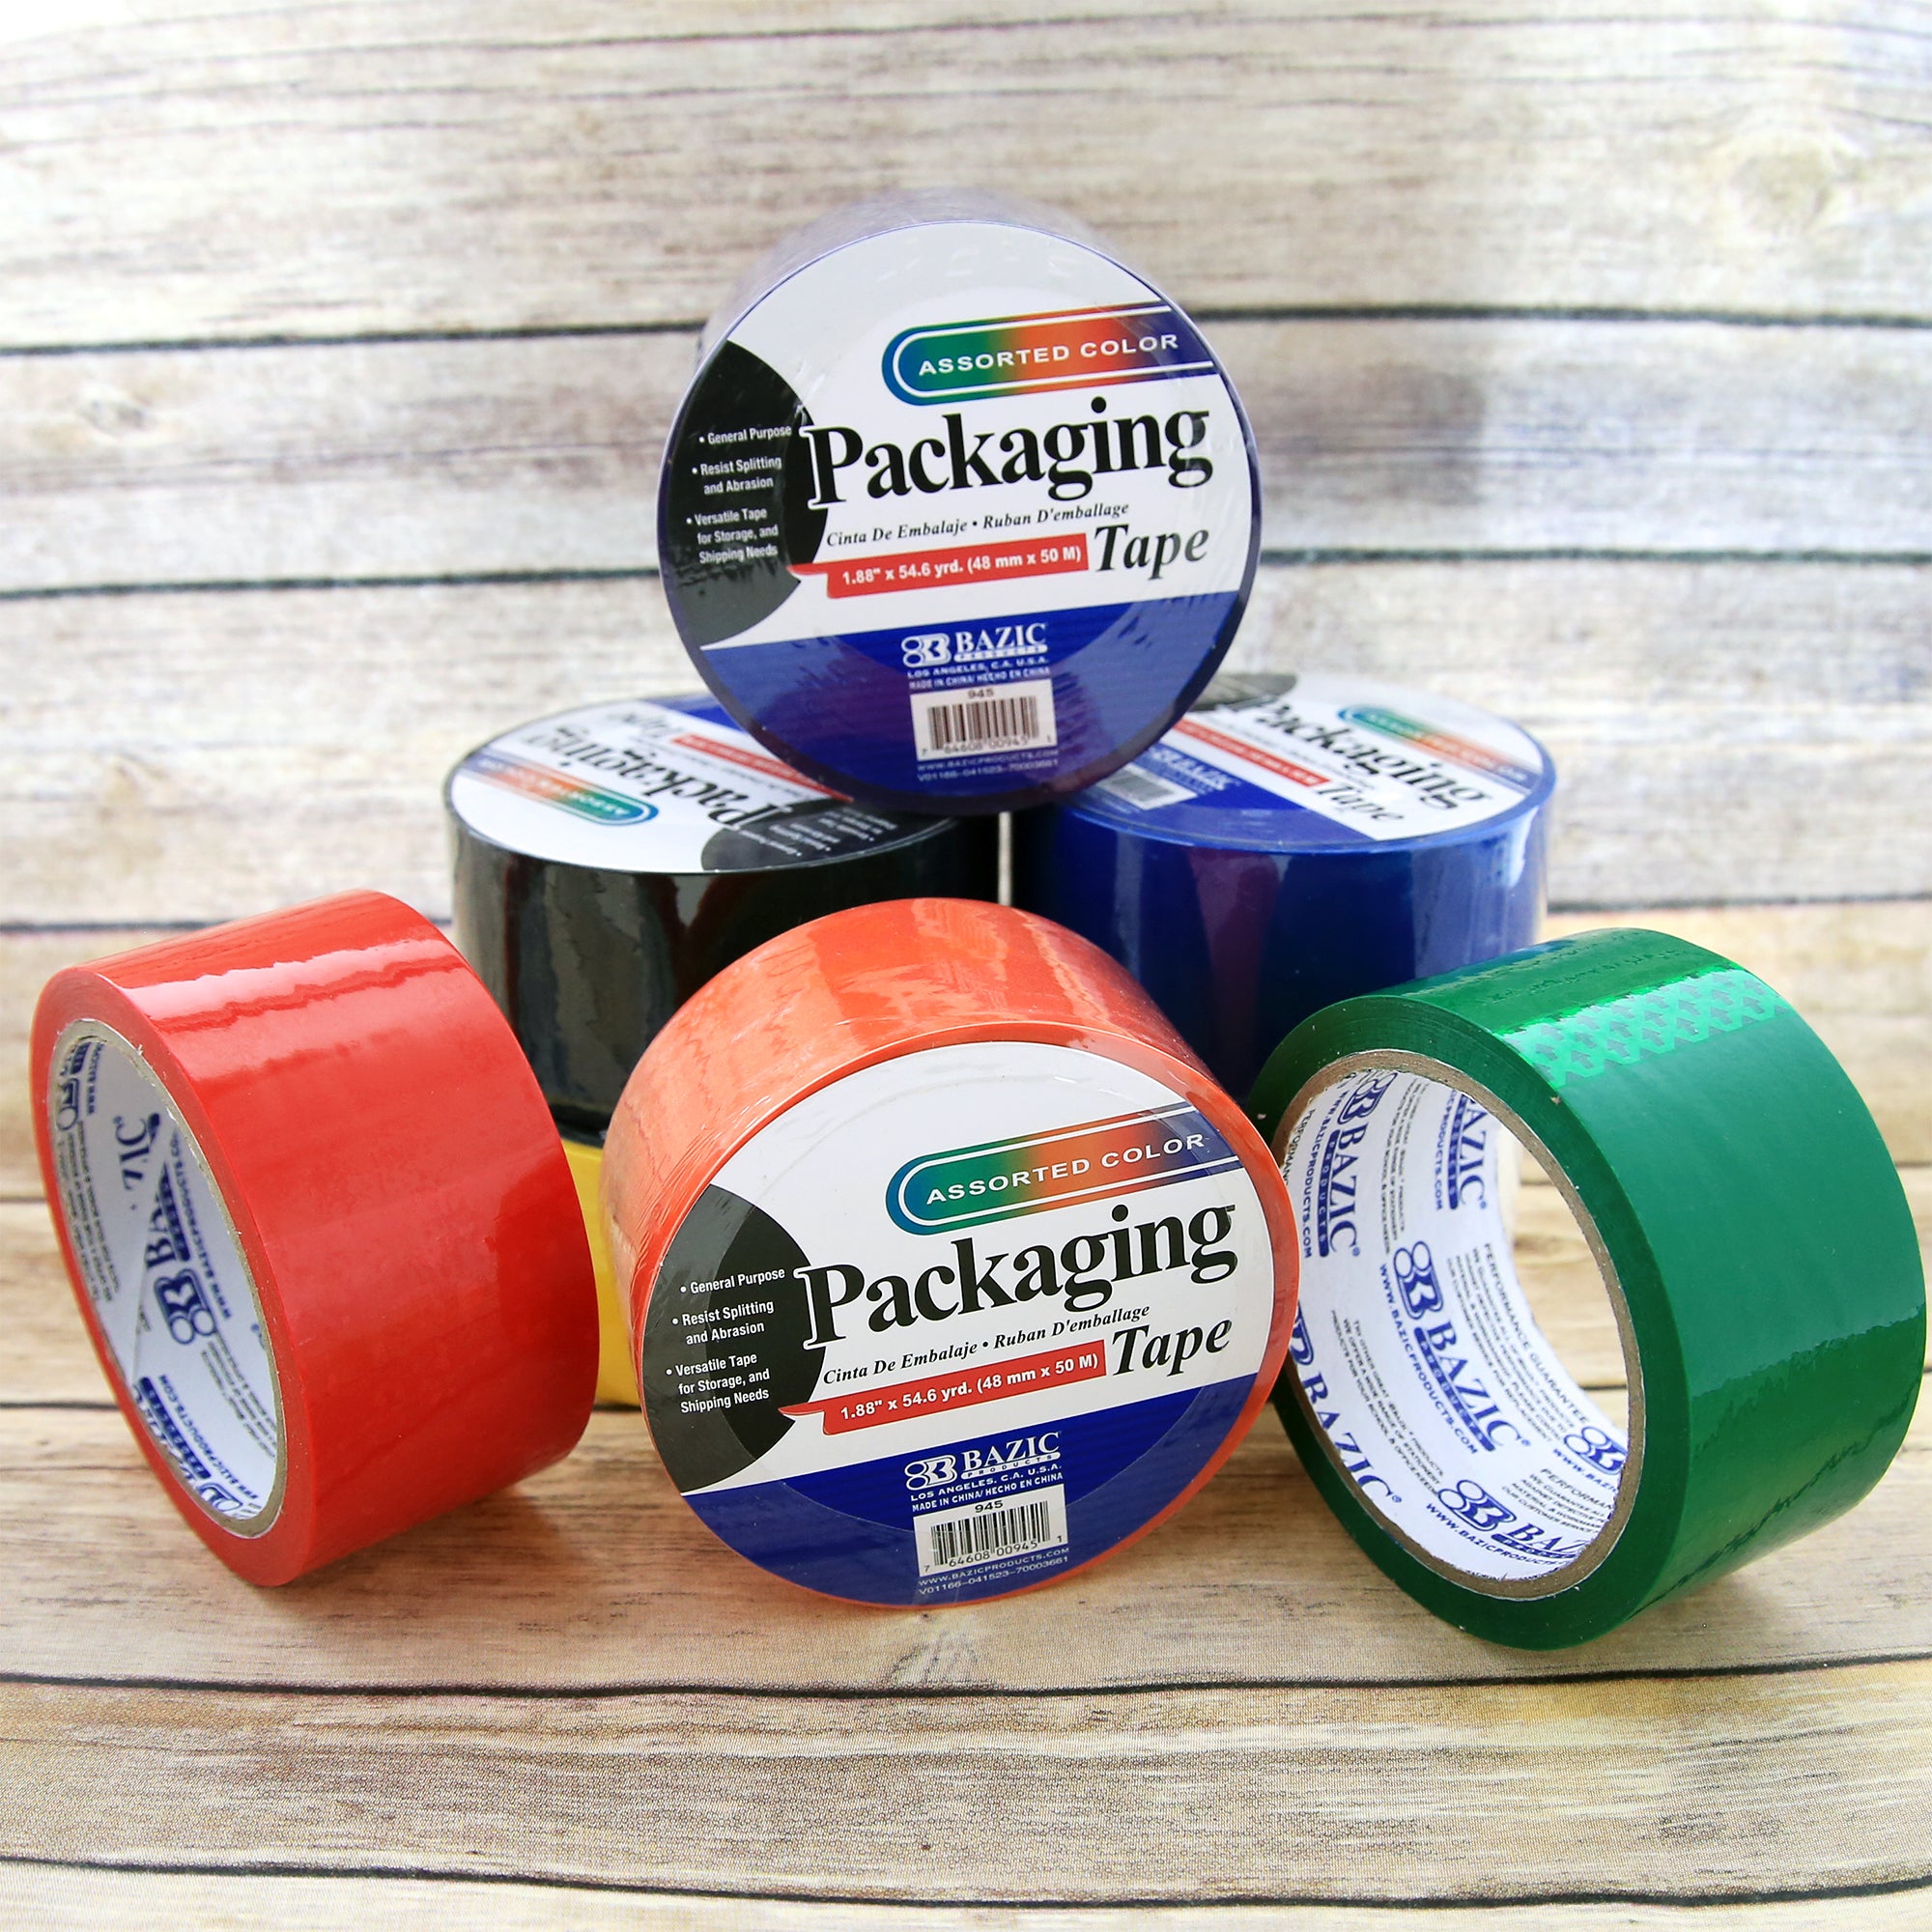 Carton Sealing Packaging Tape- Several Colors Available